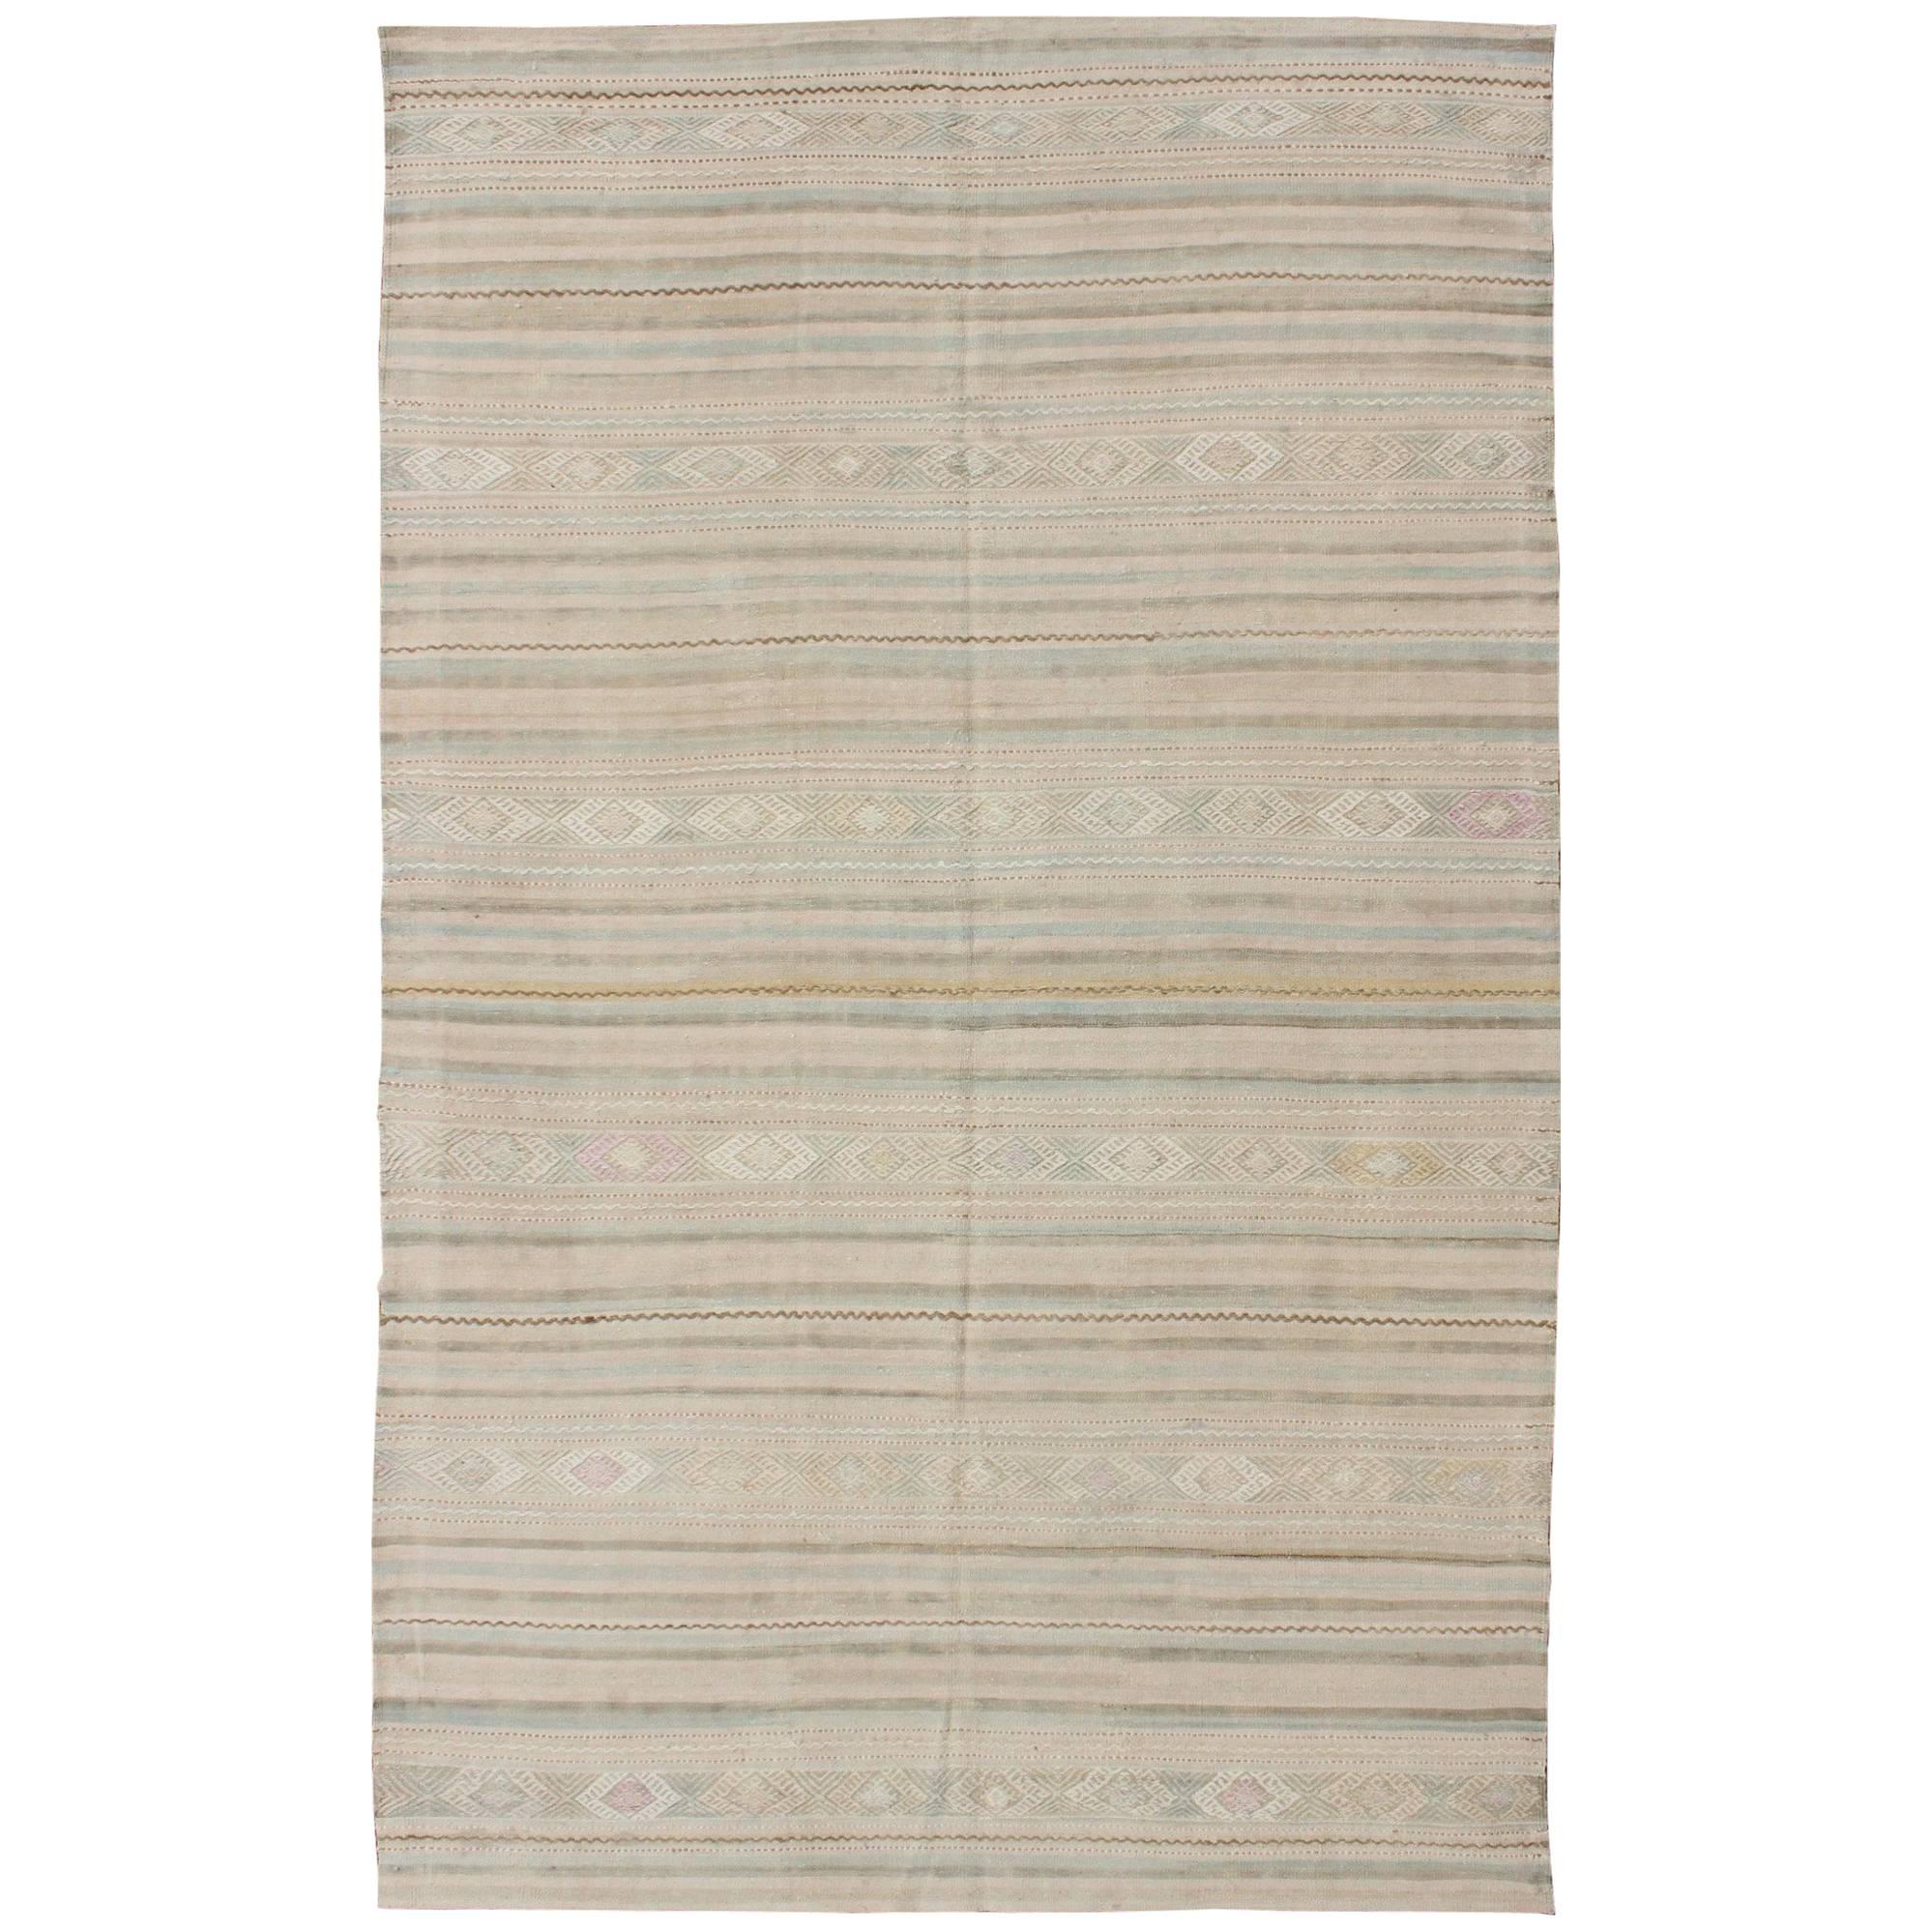 Vintage Turkish Kilim Rug with Neutral Horizontal Stripes and Geometric Designs For Sale